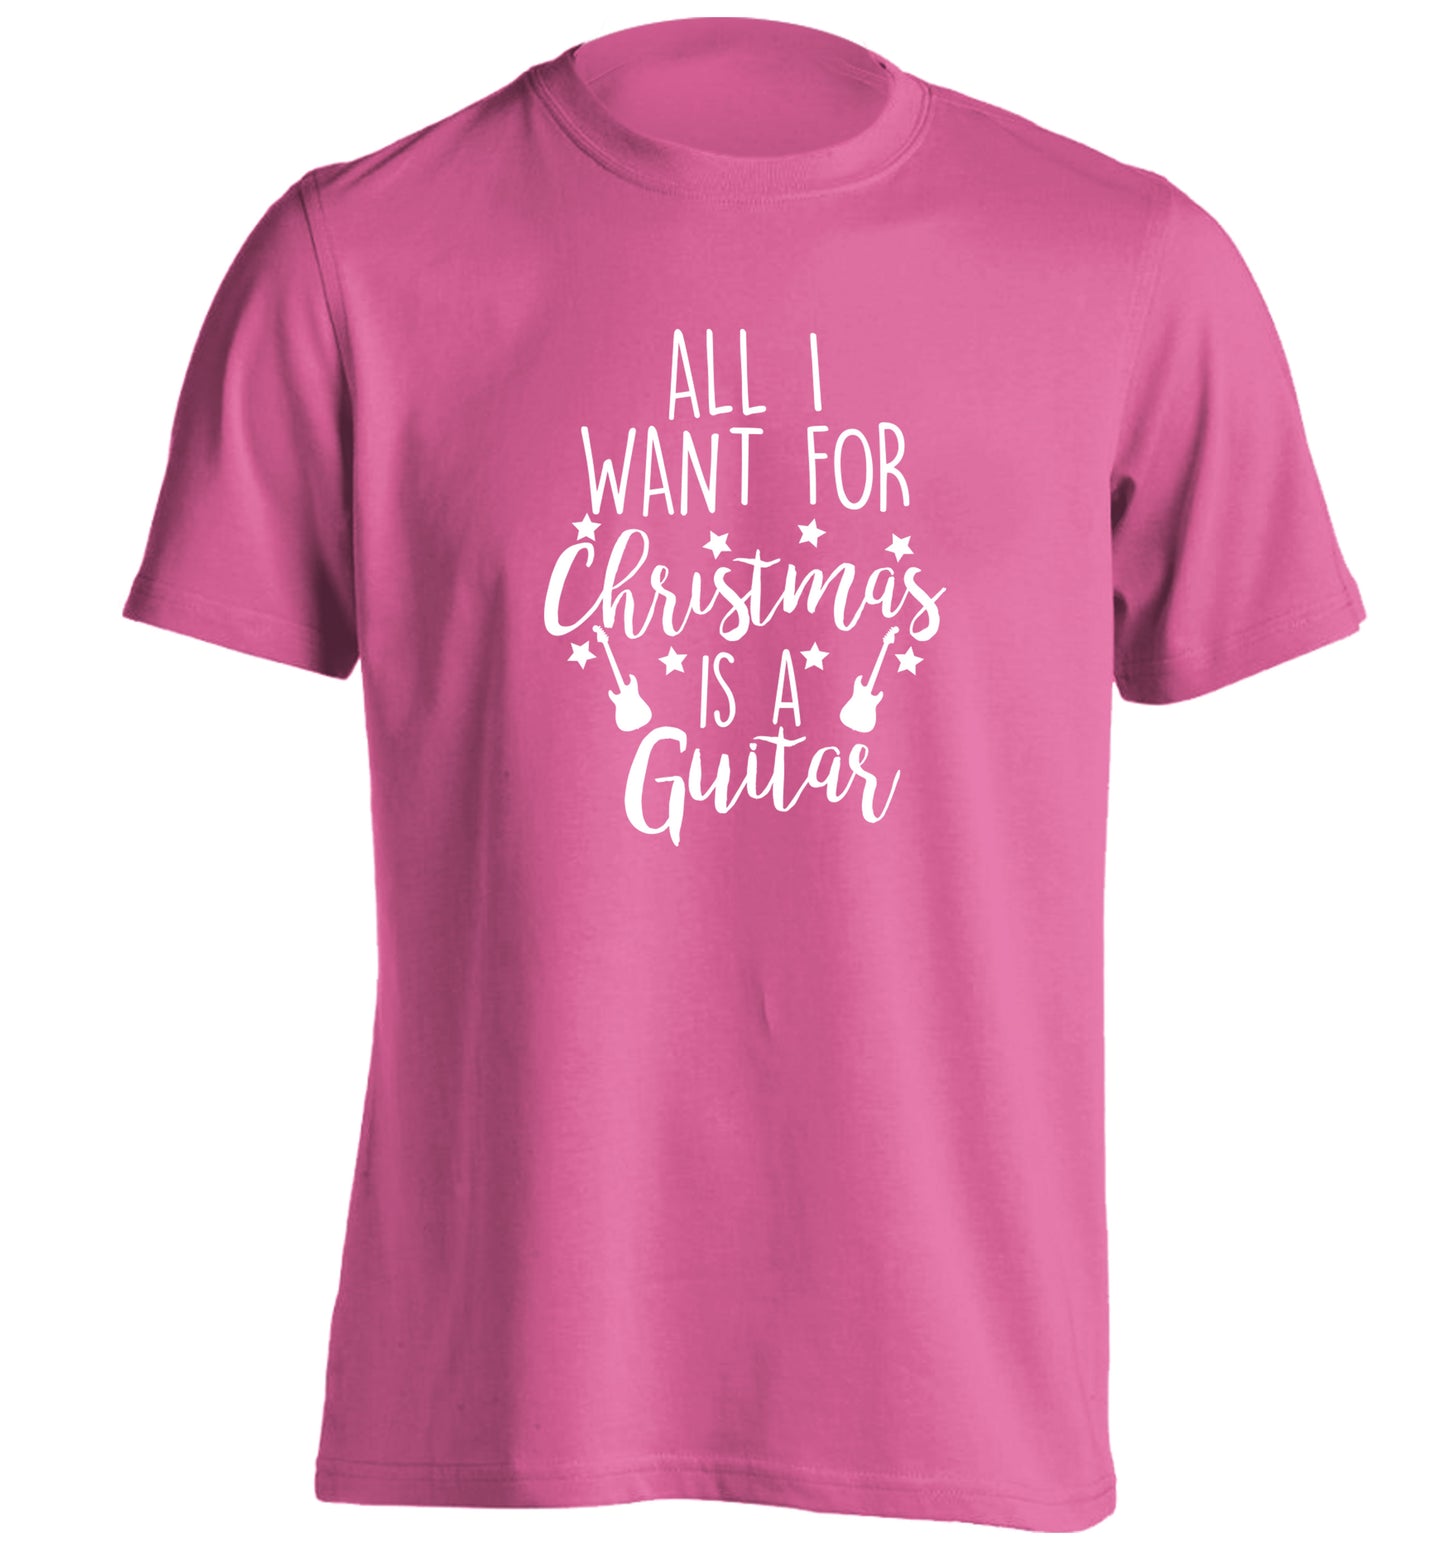 All I want for Christmas is a guitar adults unisex pink Tshirt 2XL